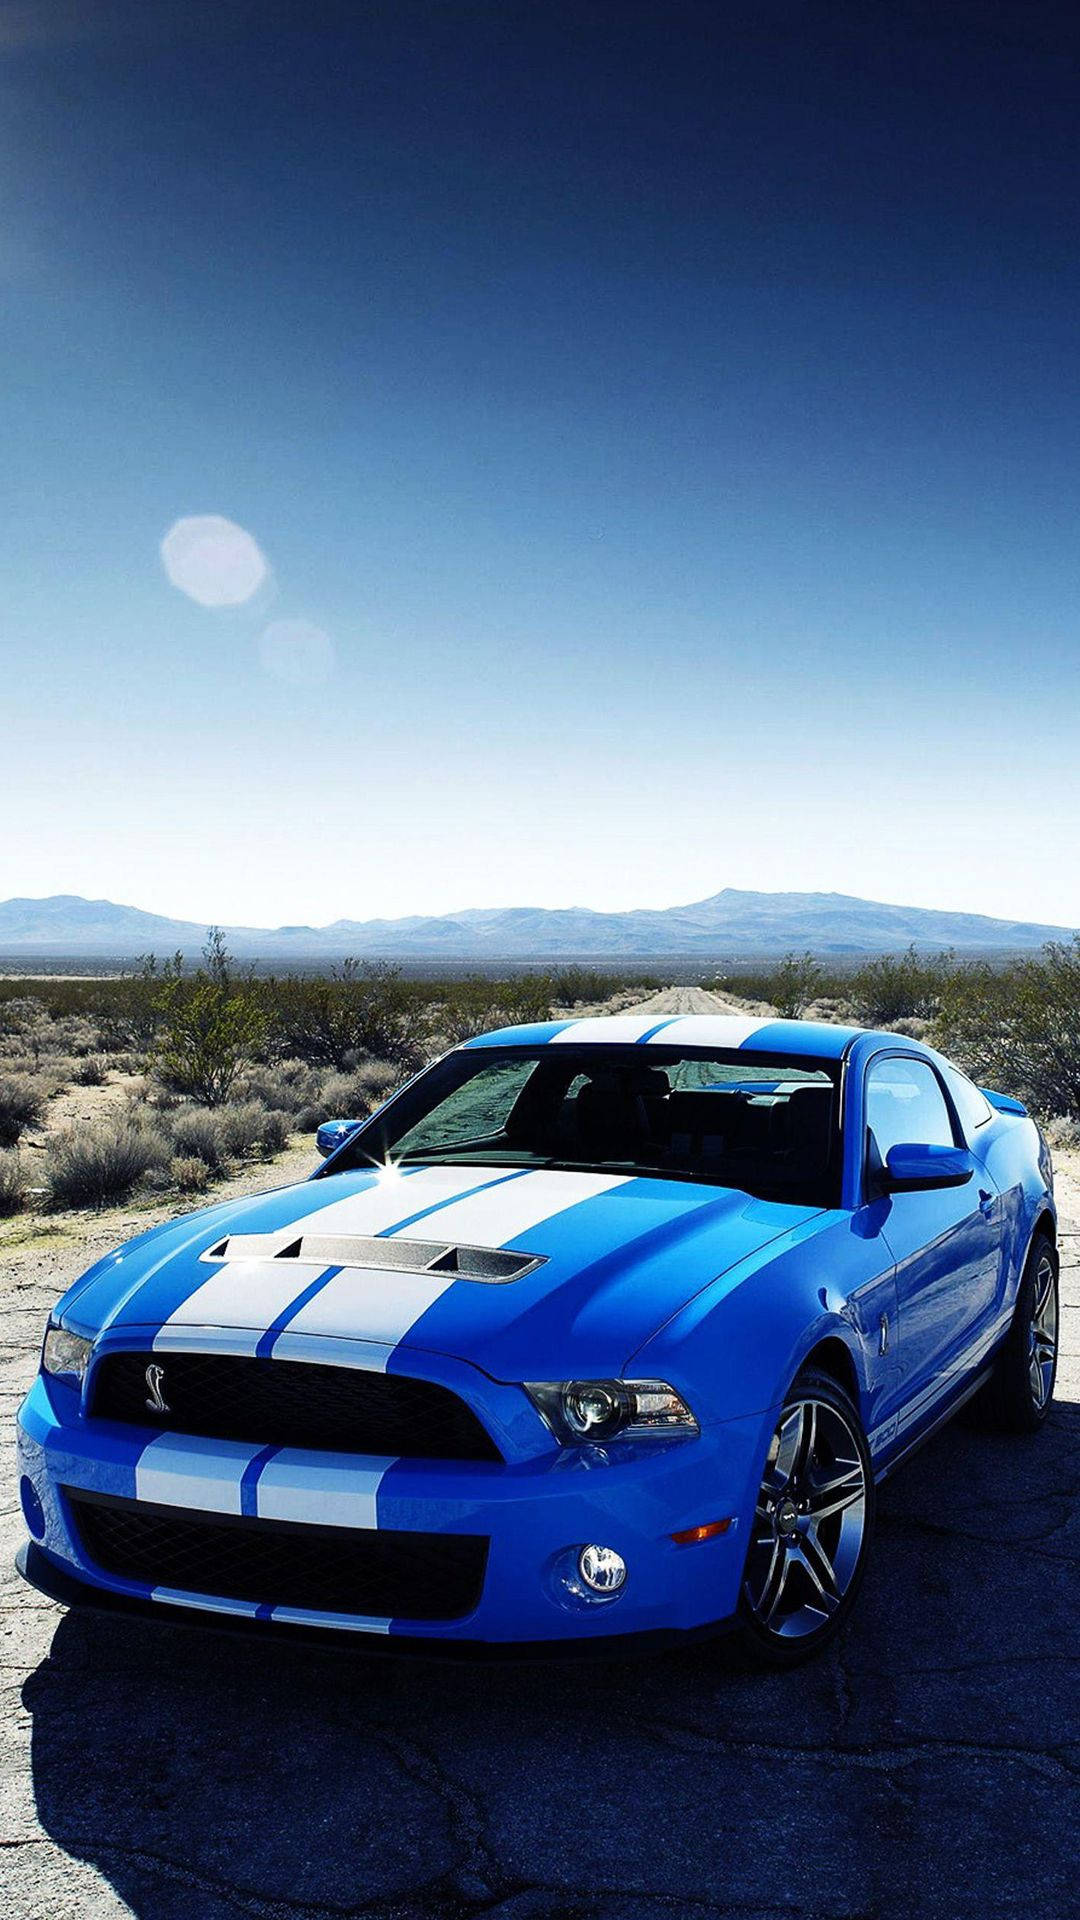 Iphone X Car Blue Shelby Mustang Background